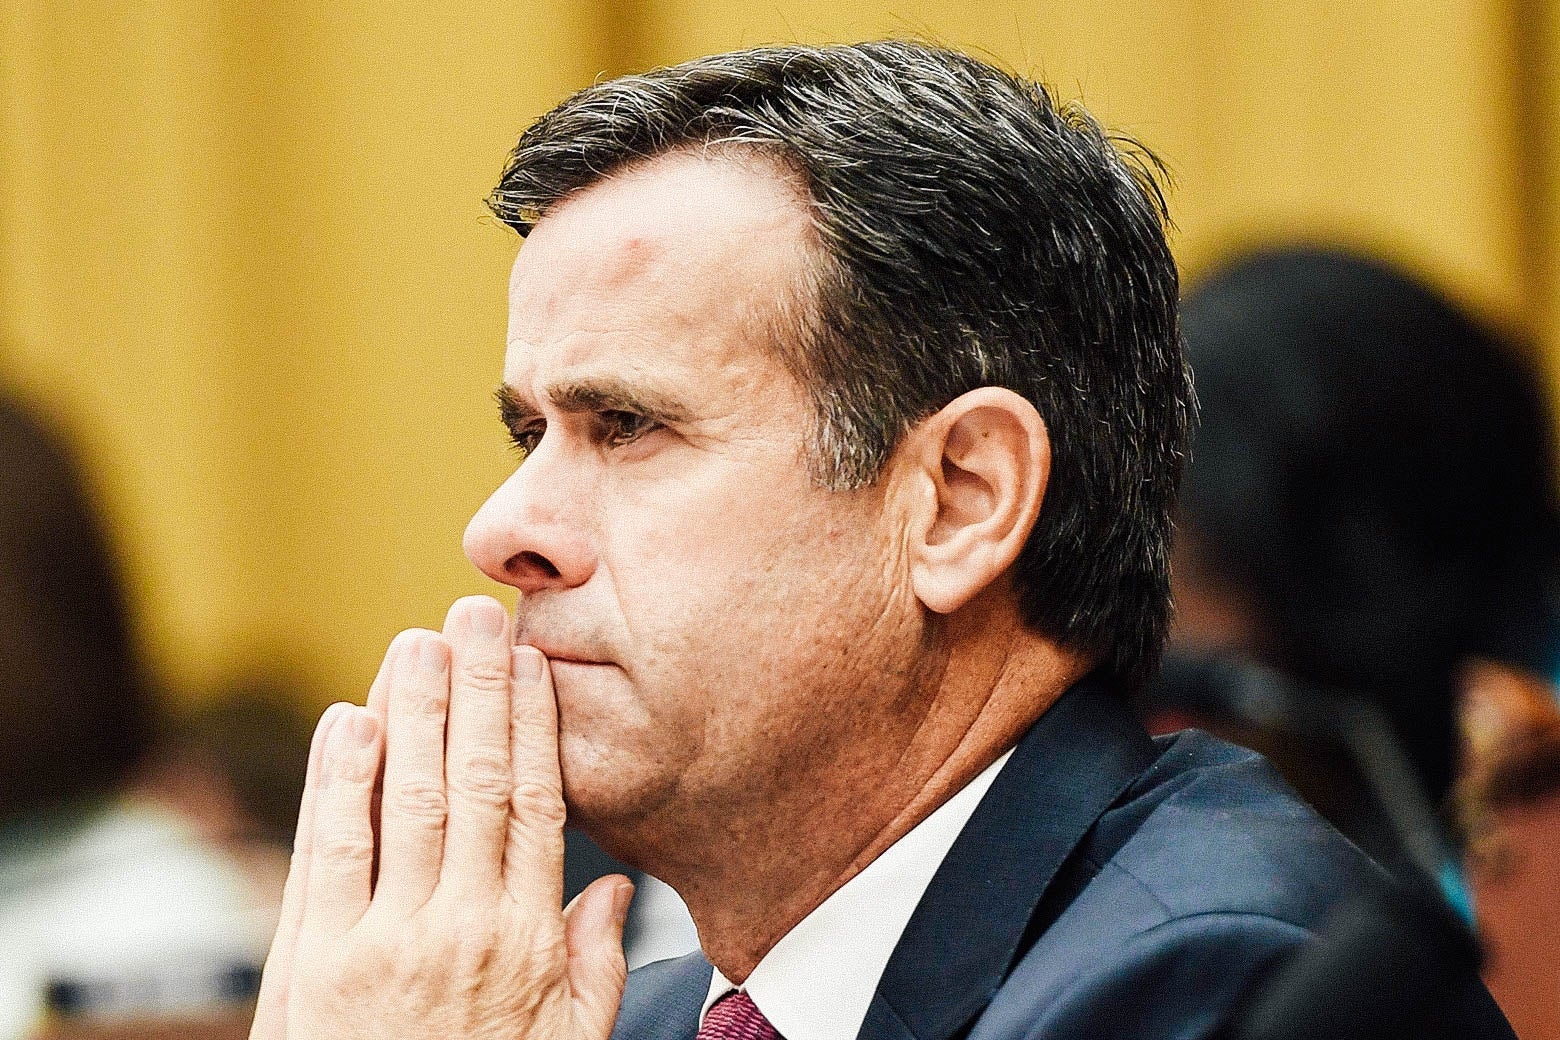 Texas Rep. John Ratcliffe leans on his hands while listening to Robert Mueller's House testimony in Washington on July 24.